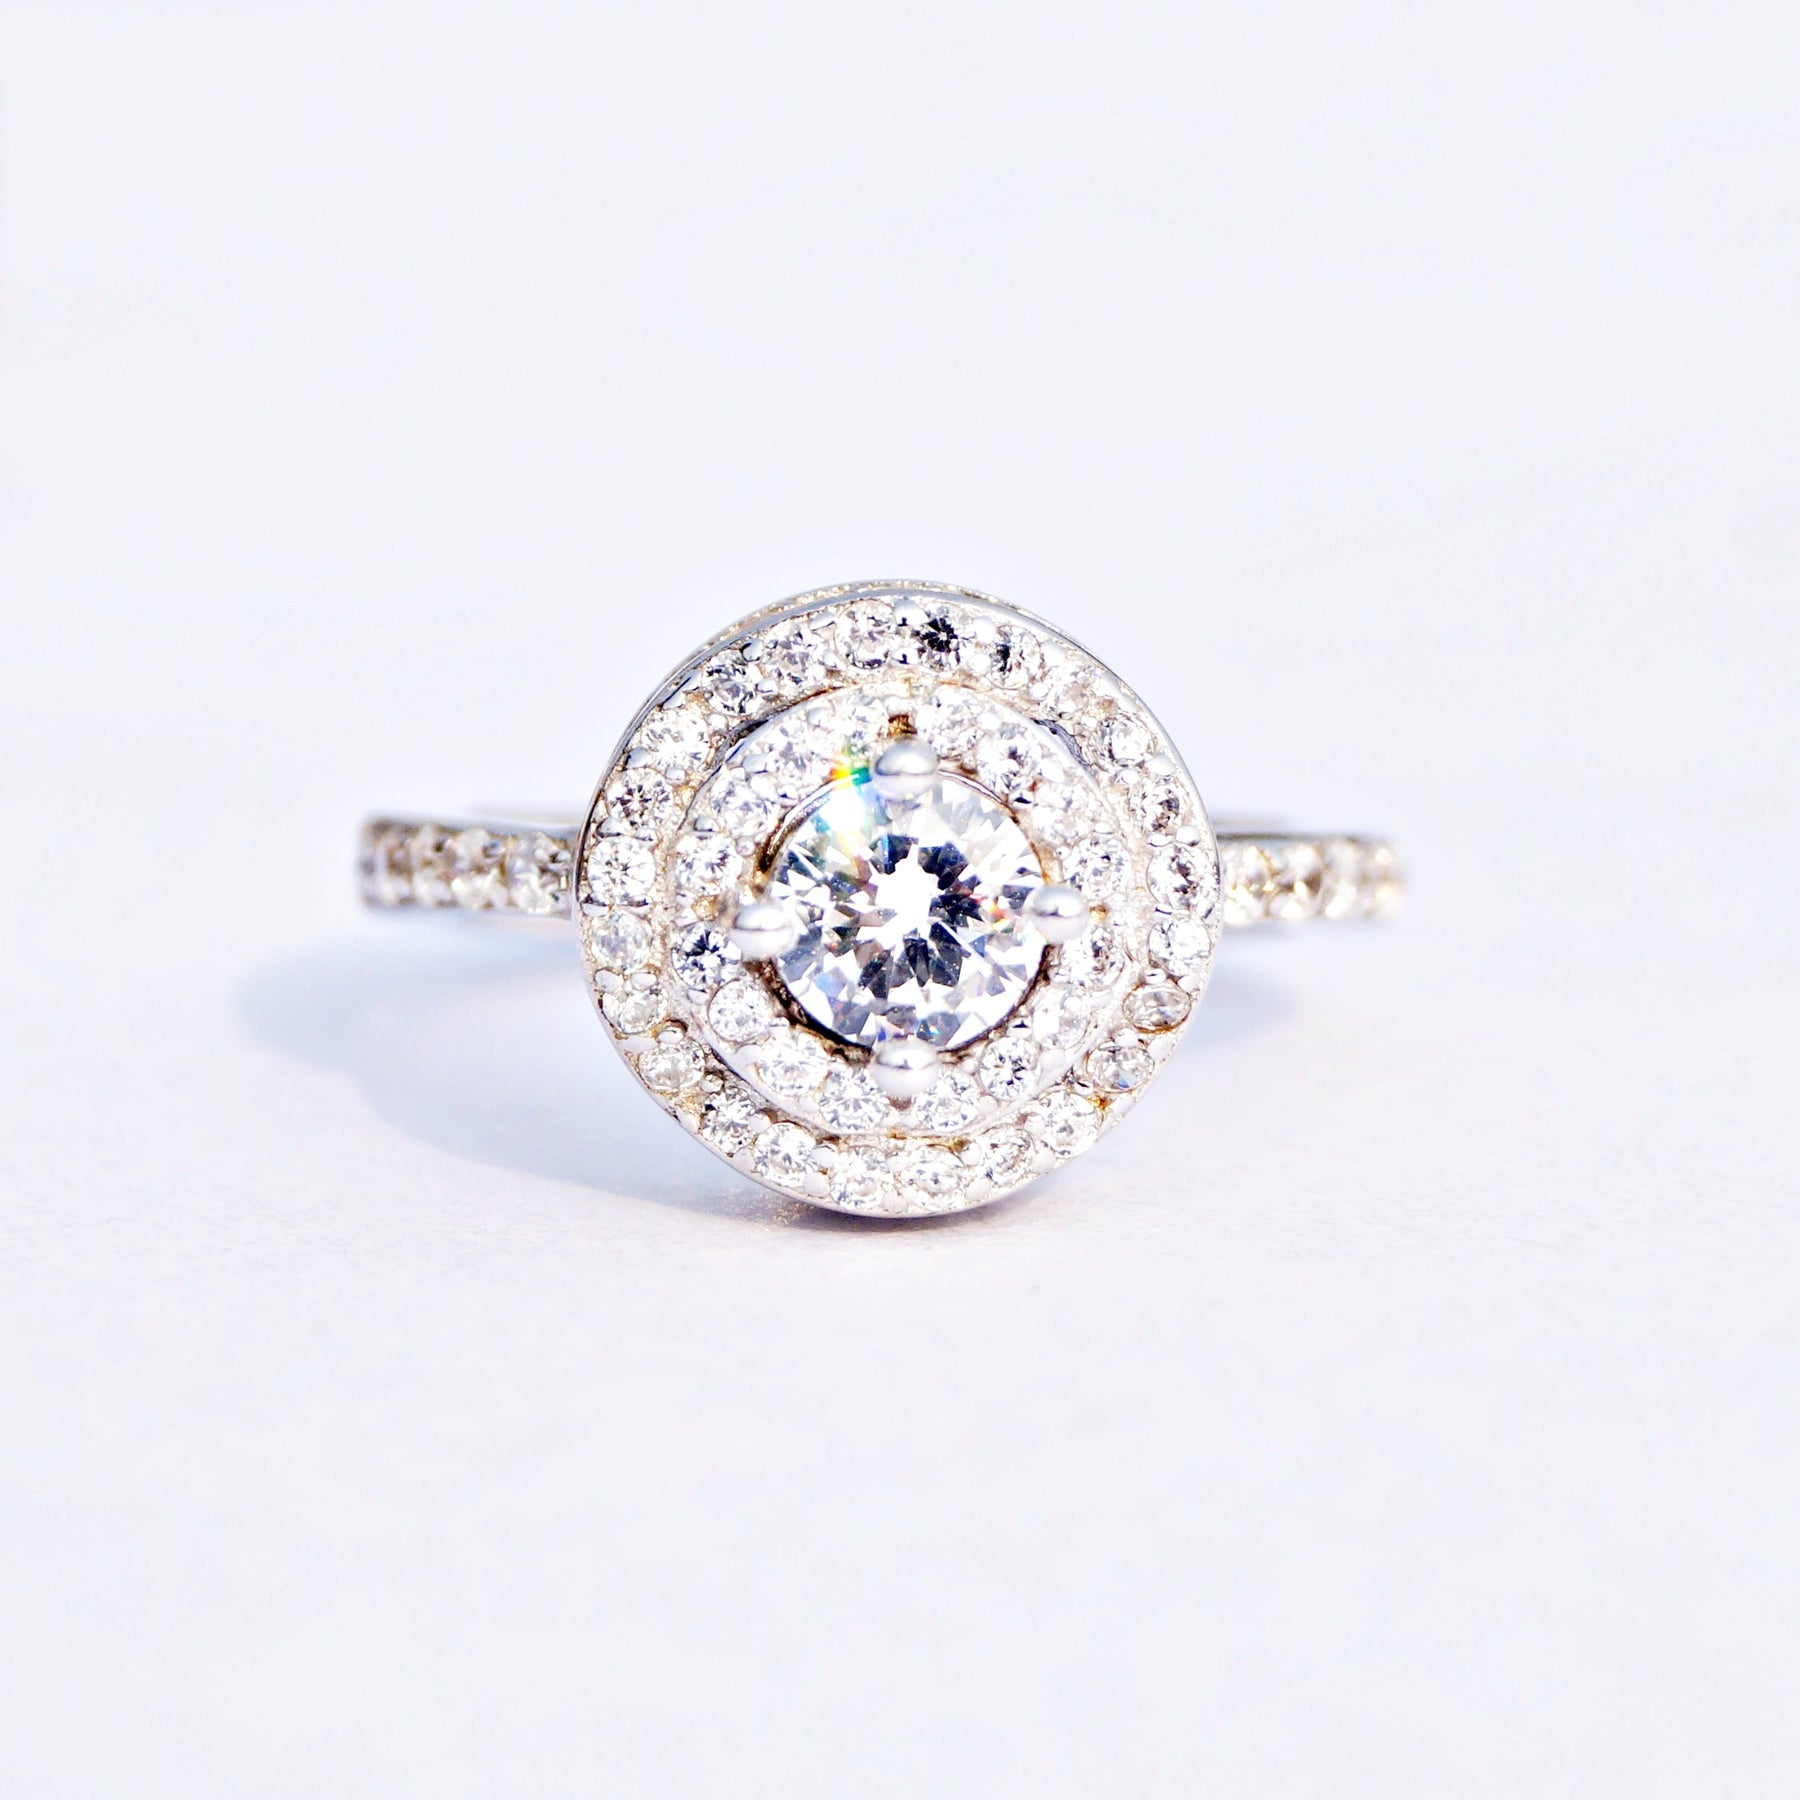 The Cake Cut Cz Ring